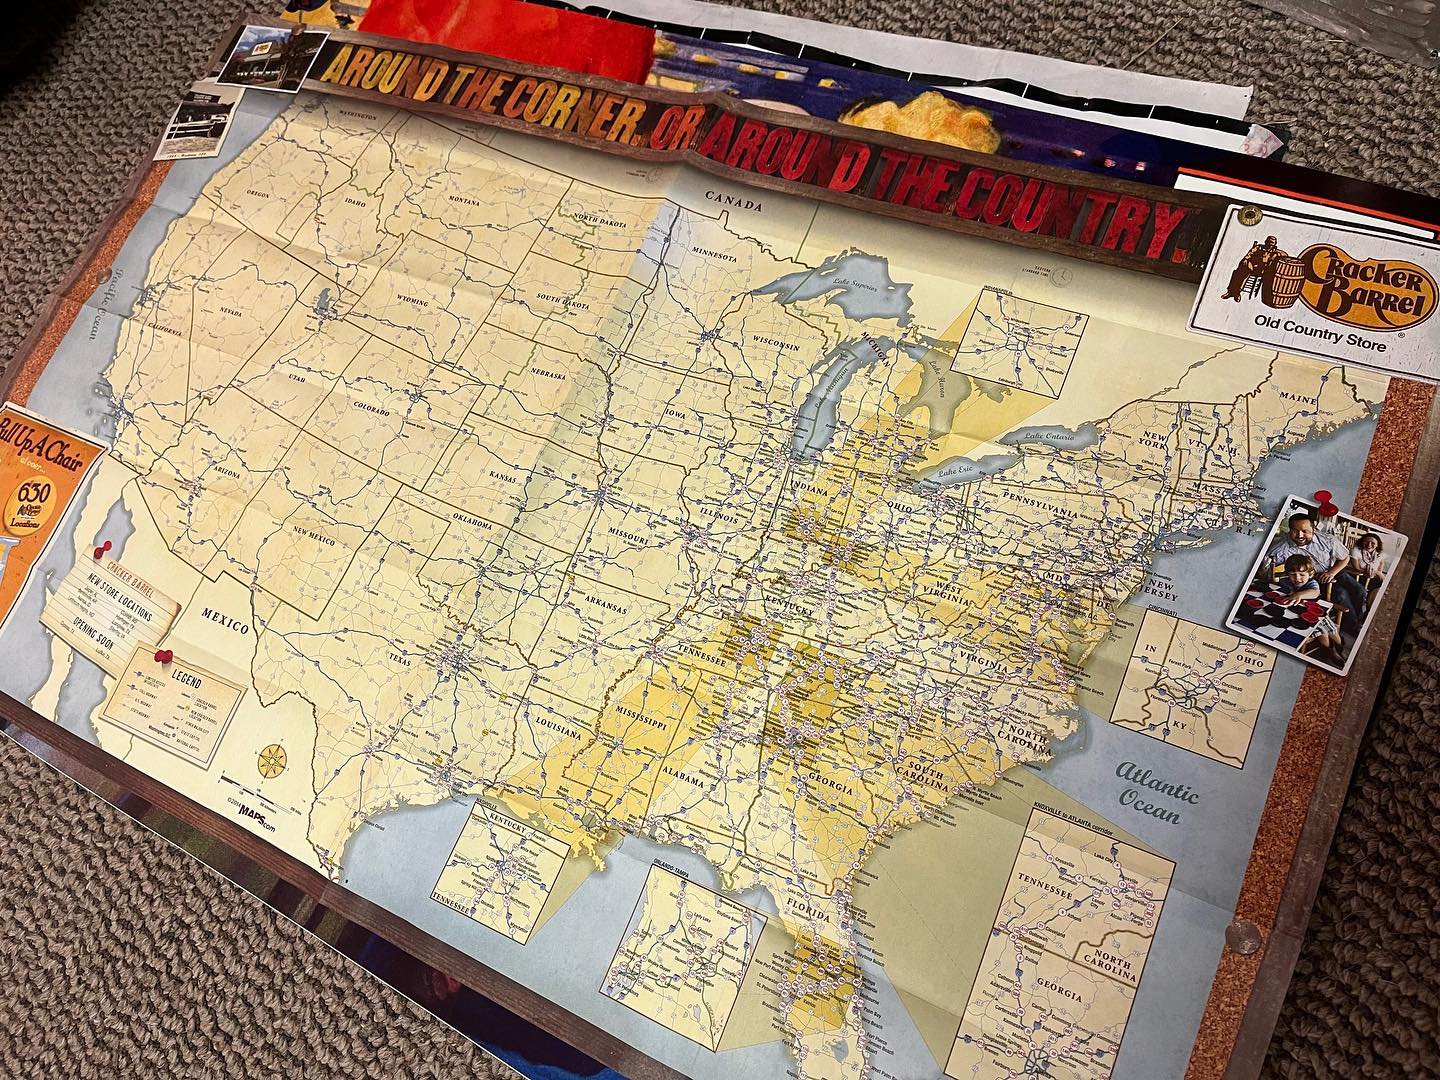 Renovations are getting real: I finally had to take the Cracker Barrel map down.